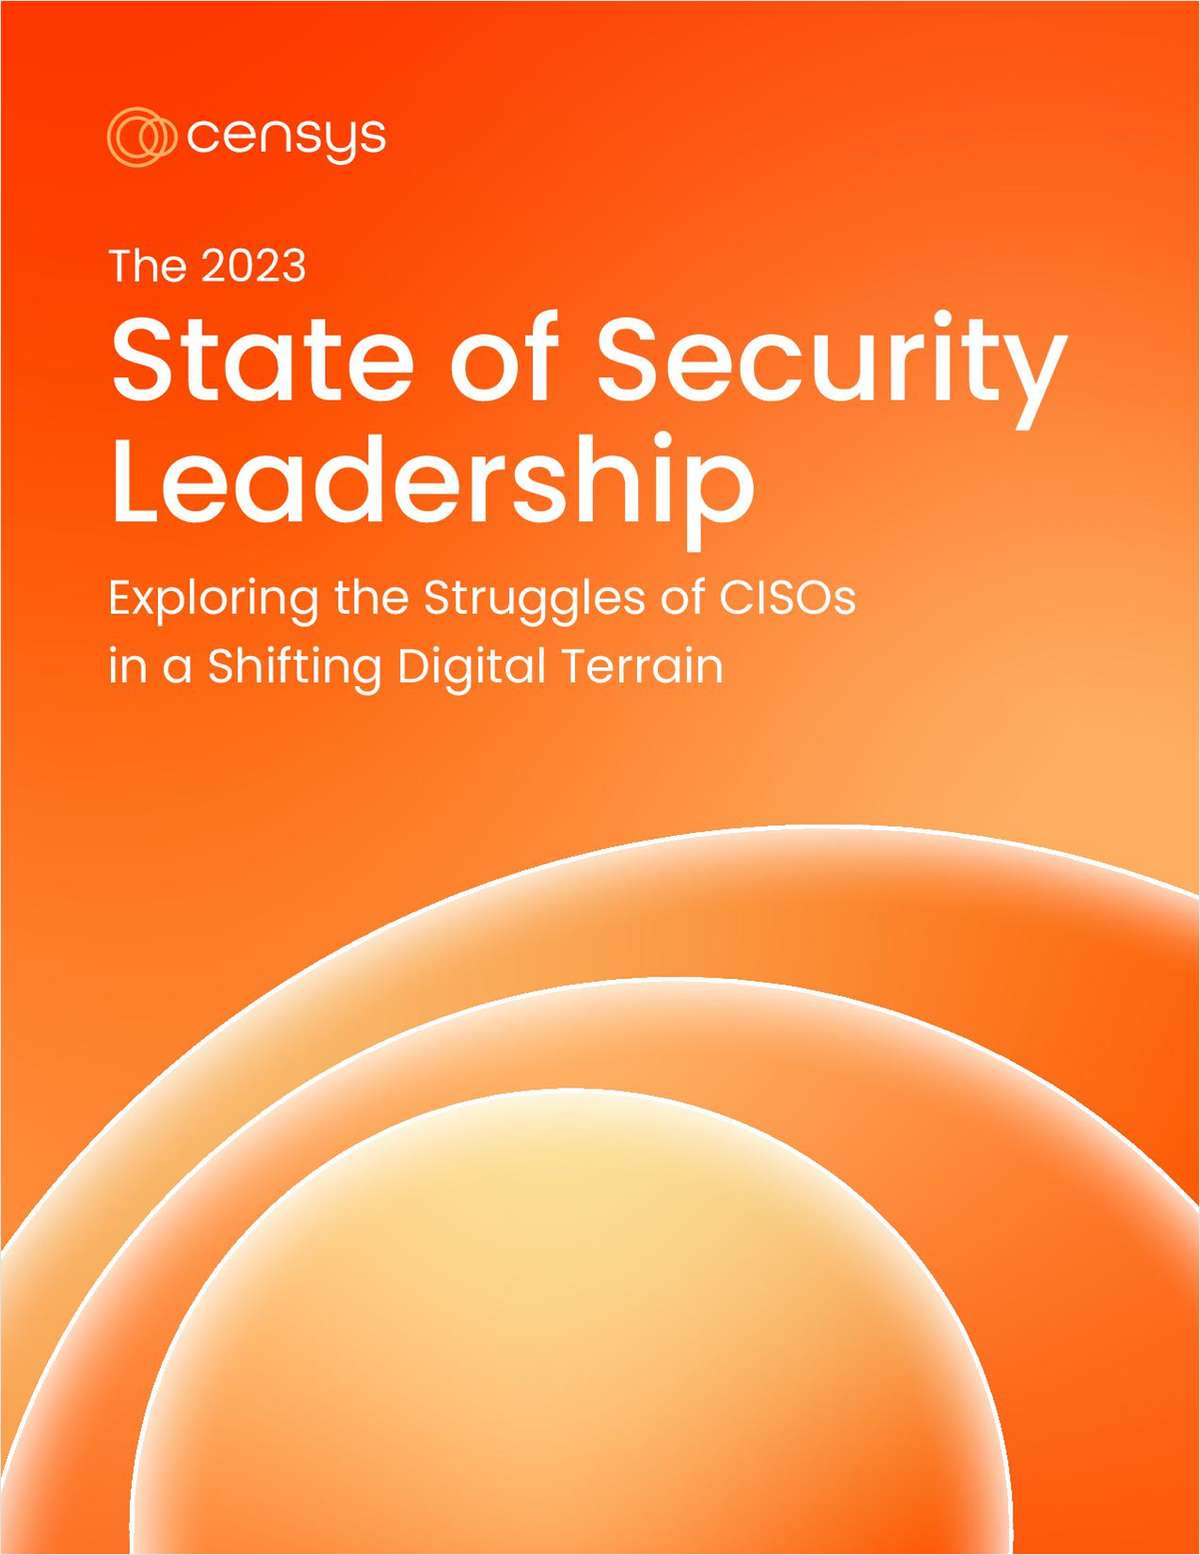 The 2023 State of Security Leadership: Exploring the Struggles of CISOs in a Shifting Digital Terrain